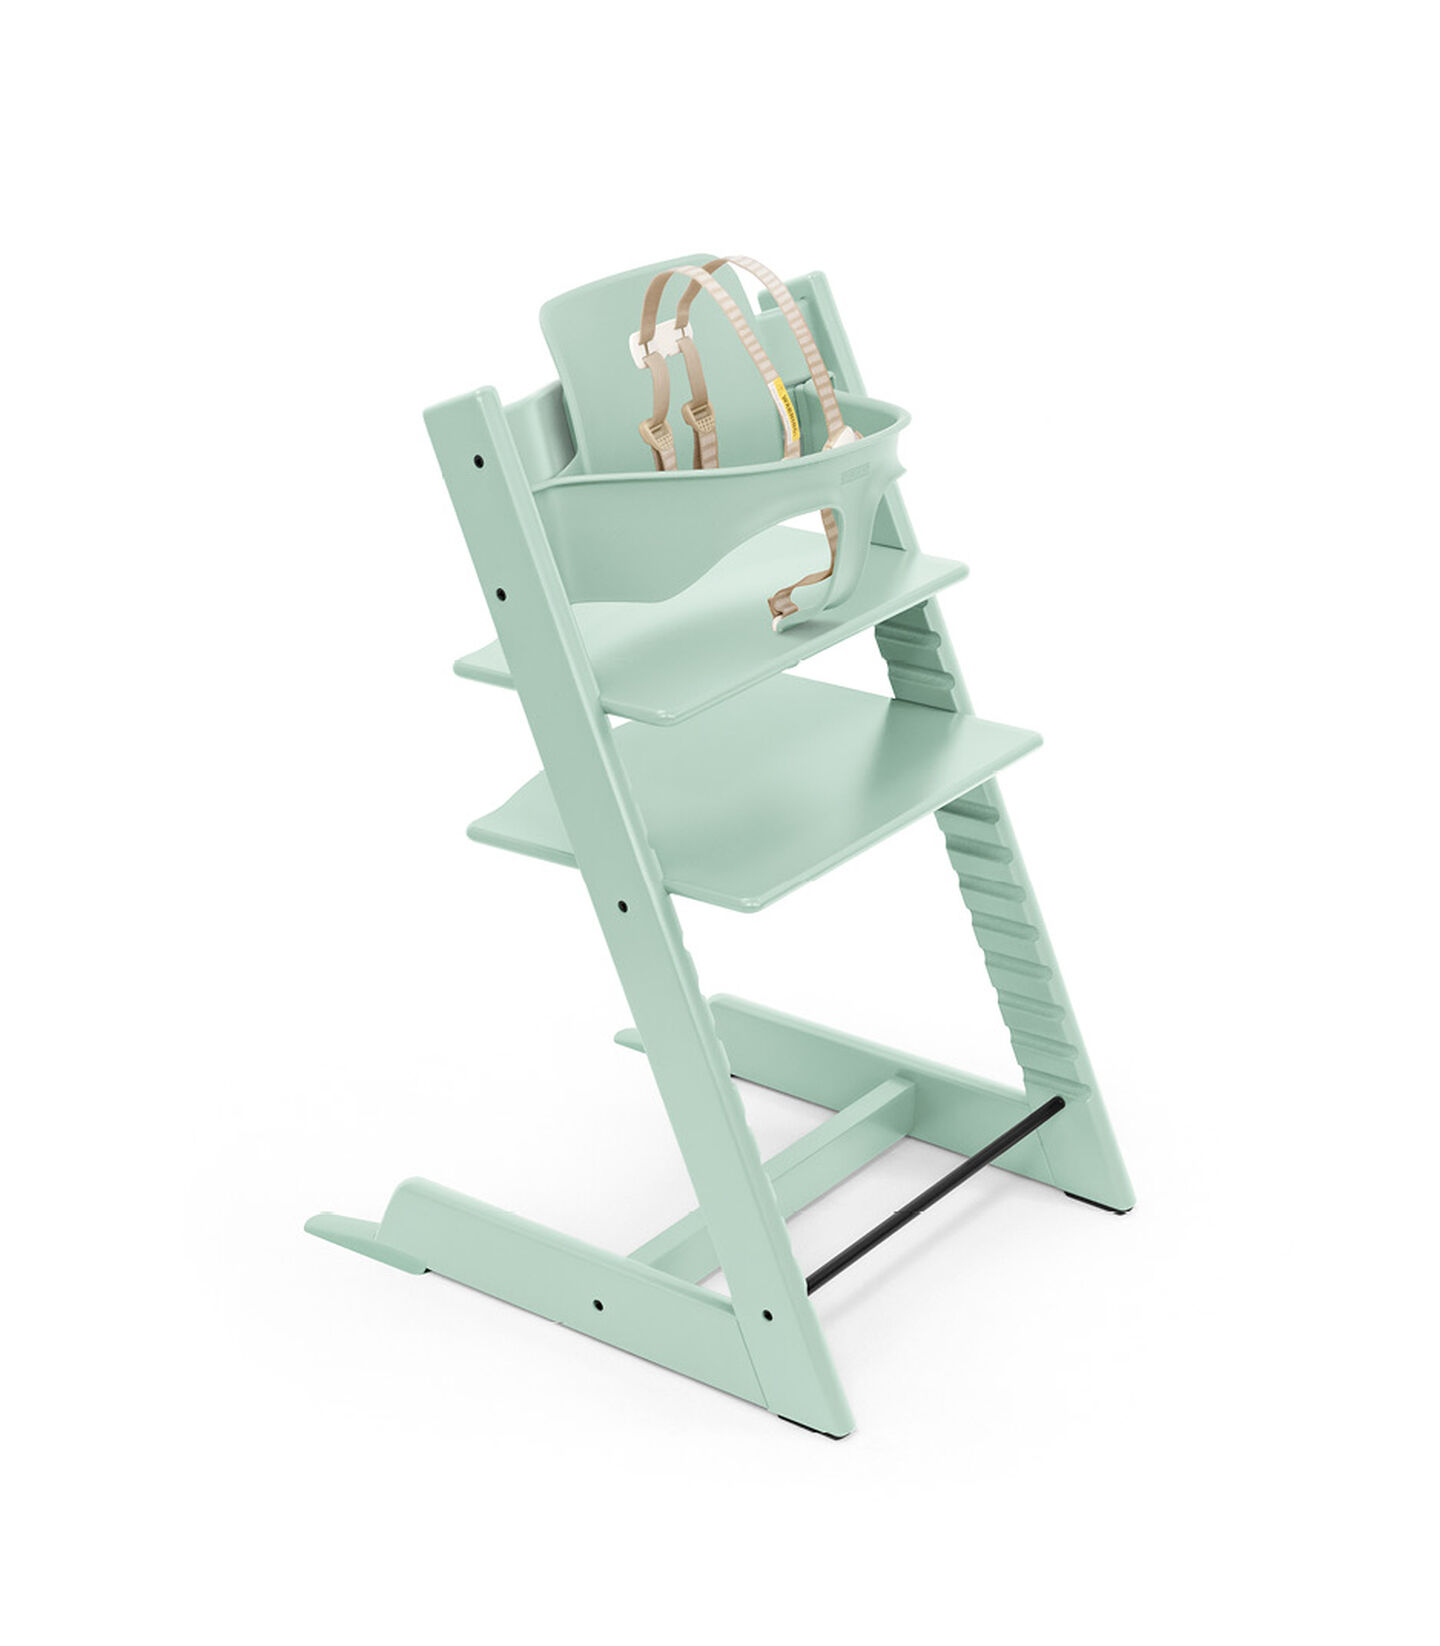 Tripp Trapp® chair Soft Mint, Beech Wood, with Baby Set and Harness, US. view 1